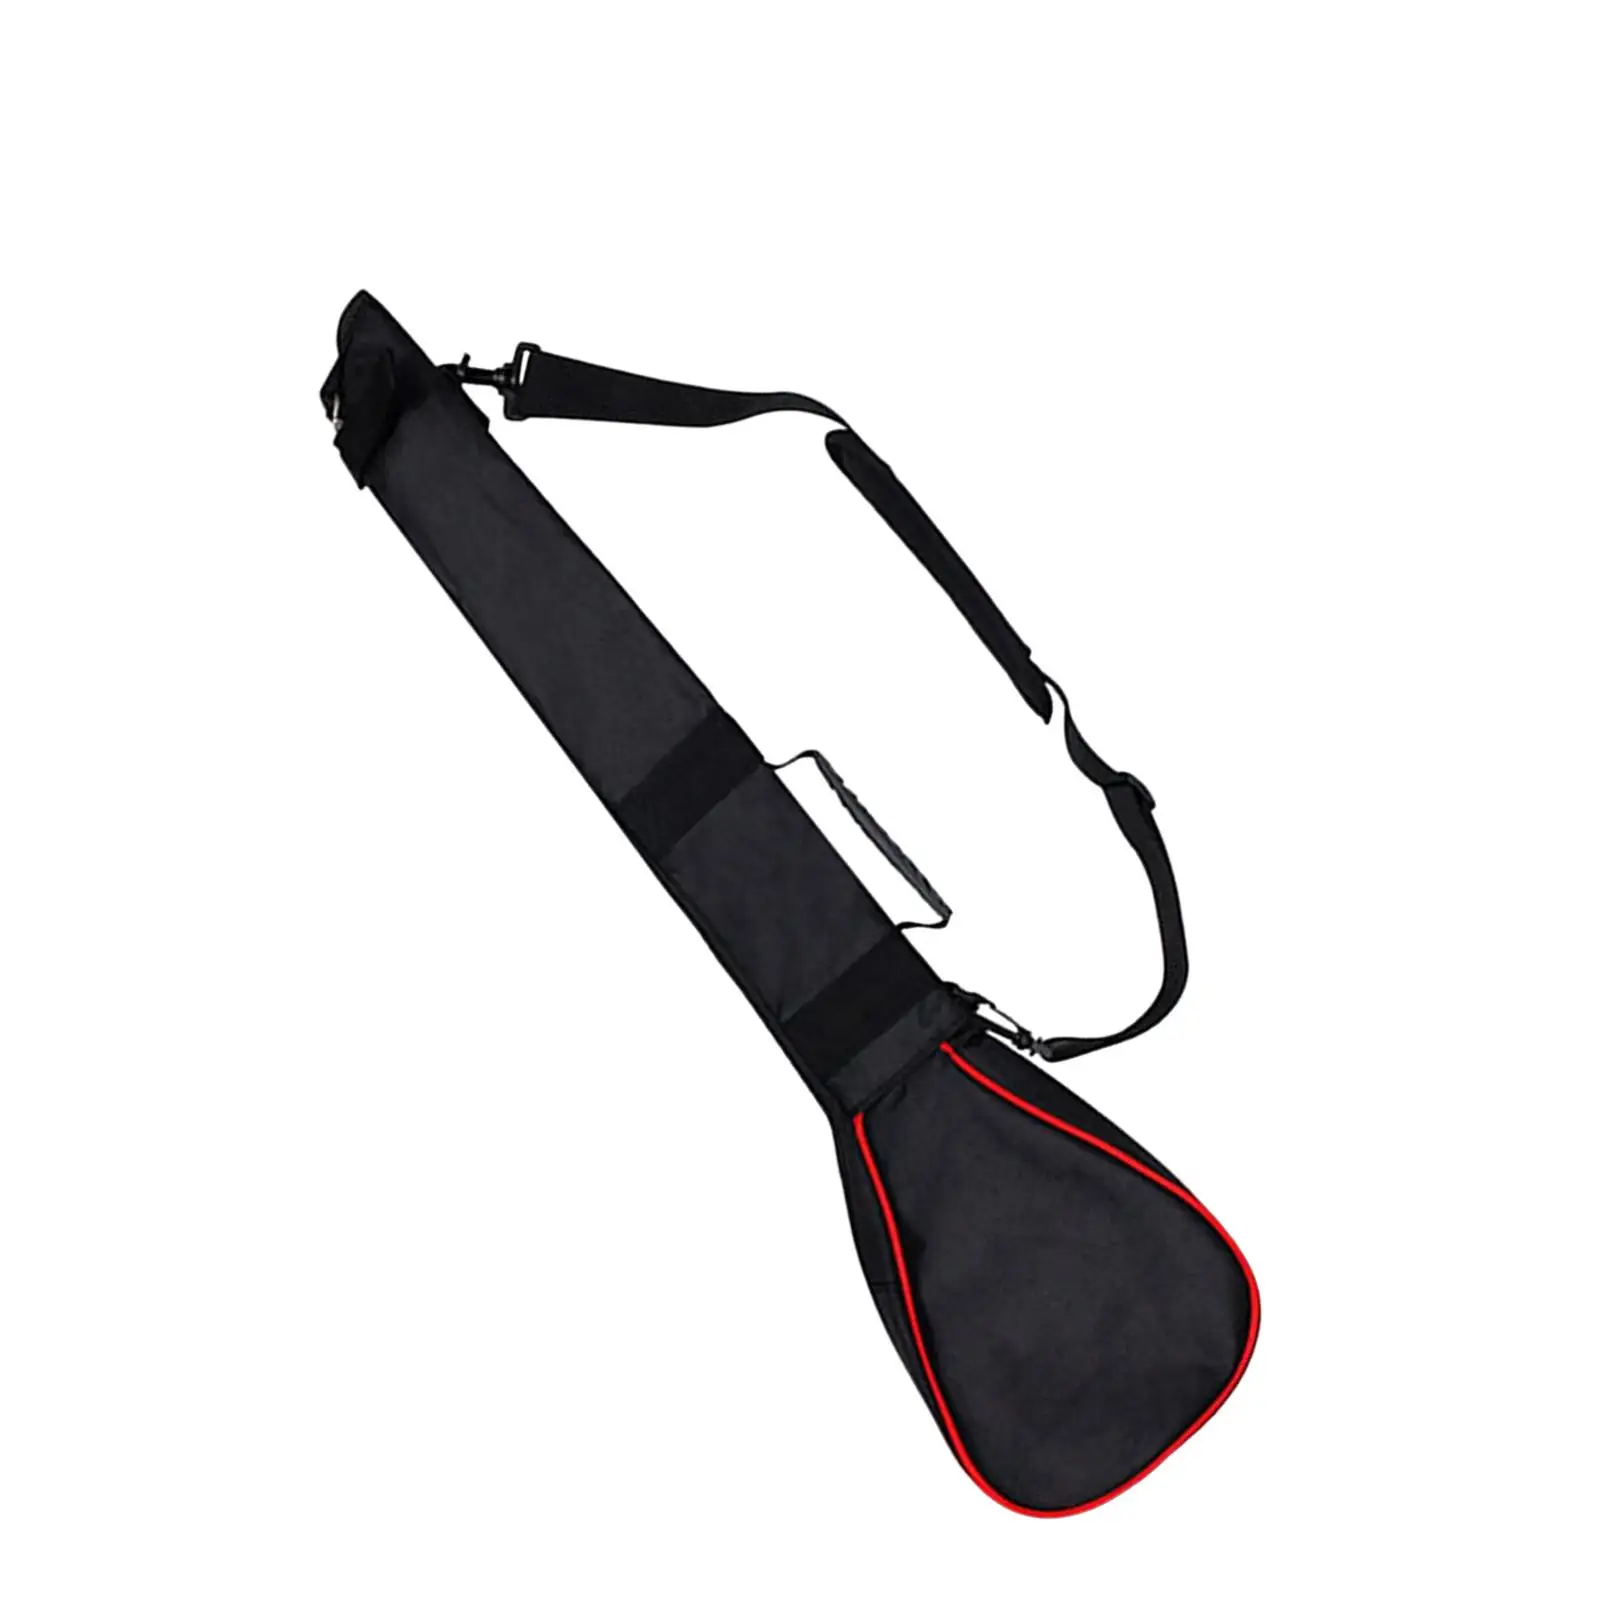 Golf Carry Bag Foldable Golf Club Bag Holding up to 3 Golf Clubs for Training Practice Outdoor Use Comfortable to Carry Durable